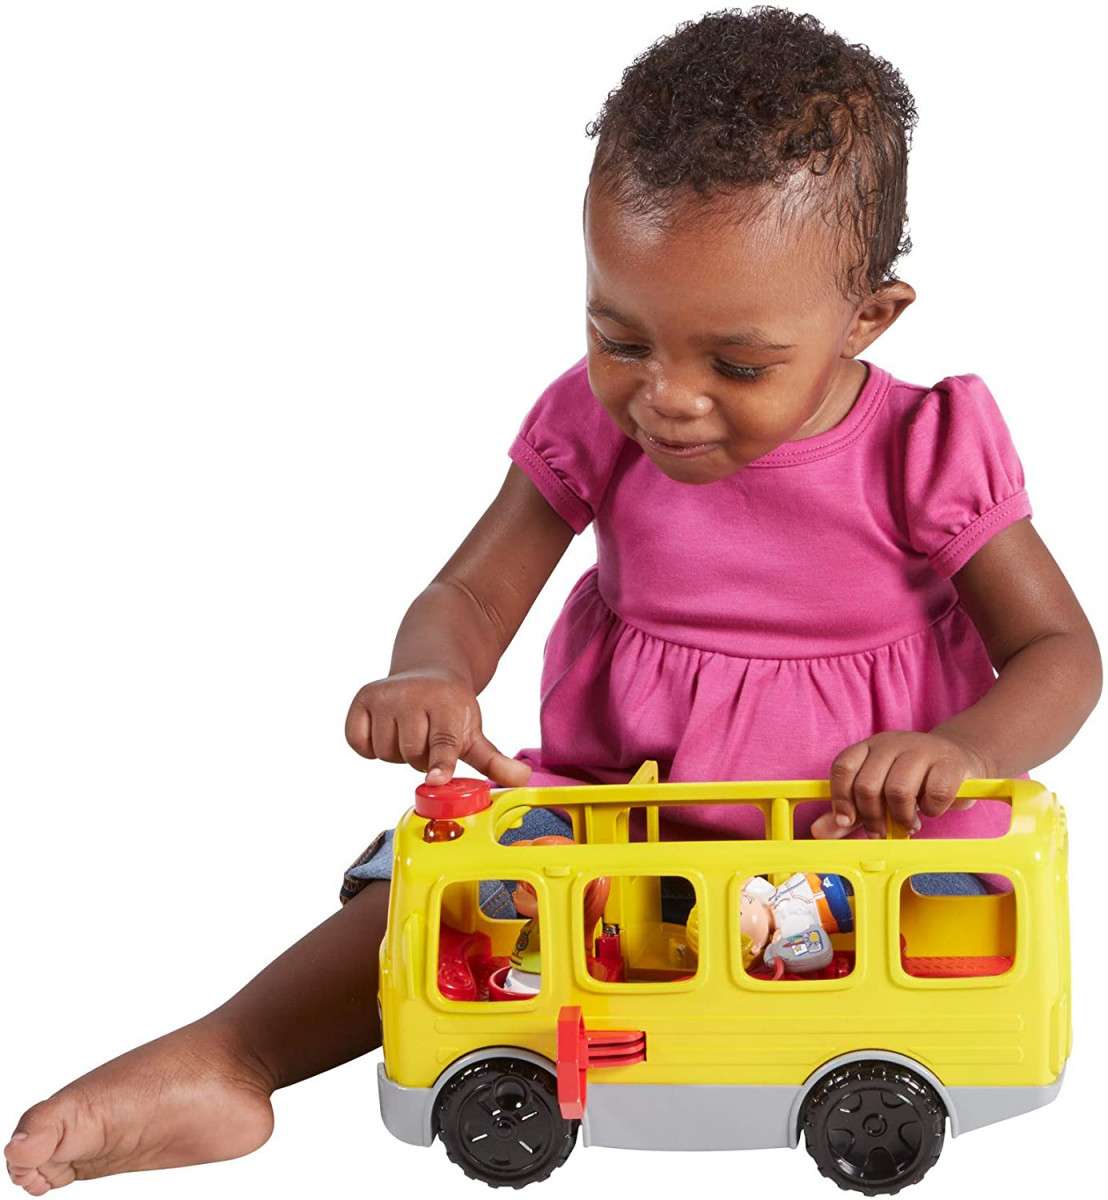 Alea's Deals 34% Off Fisher-Price Little People Sit with Me School Bus Vehicle! Was $14.99!  